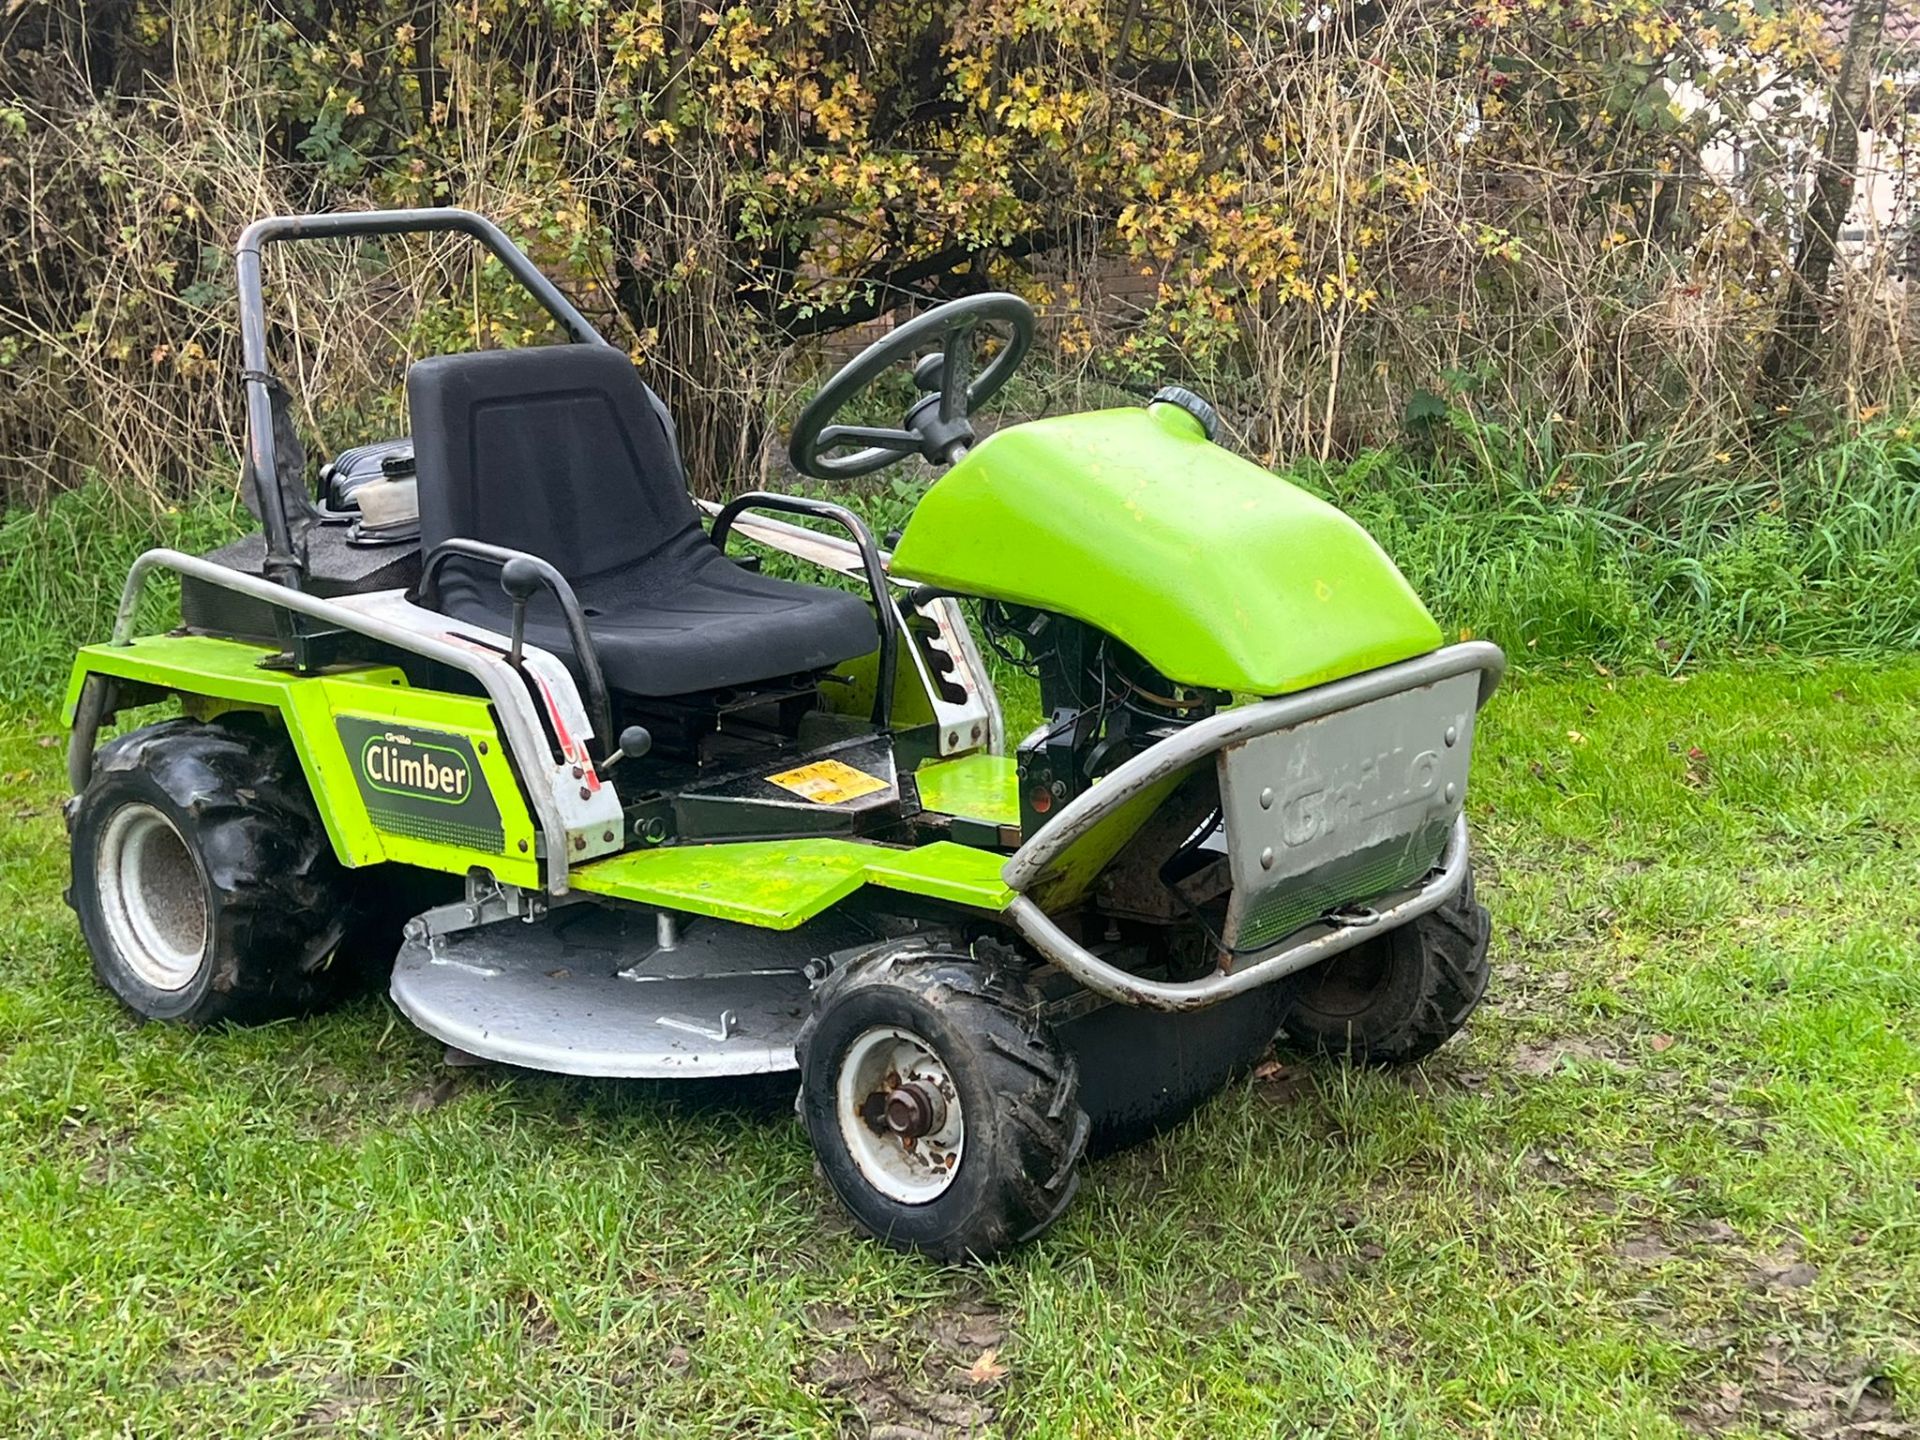 GRILLO CLIMBER 910 RIDE ON LAWN MOWER BANK MOWER - 18HP V TWIN BRIGGS AND STRATTON ENGINE *PLUS VAT*